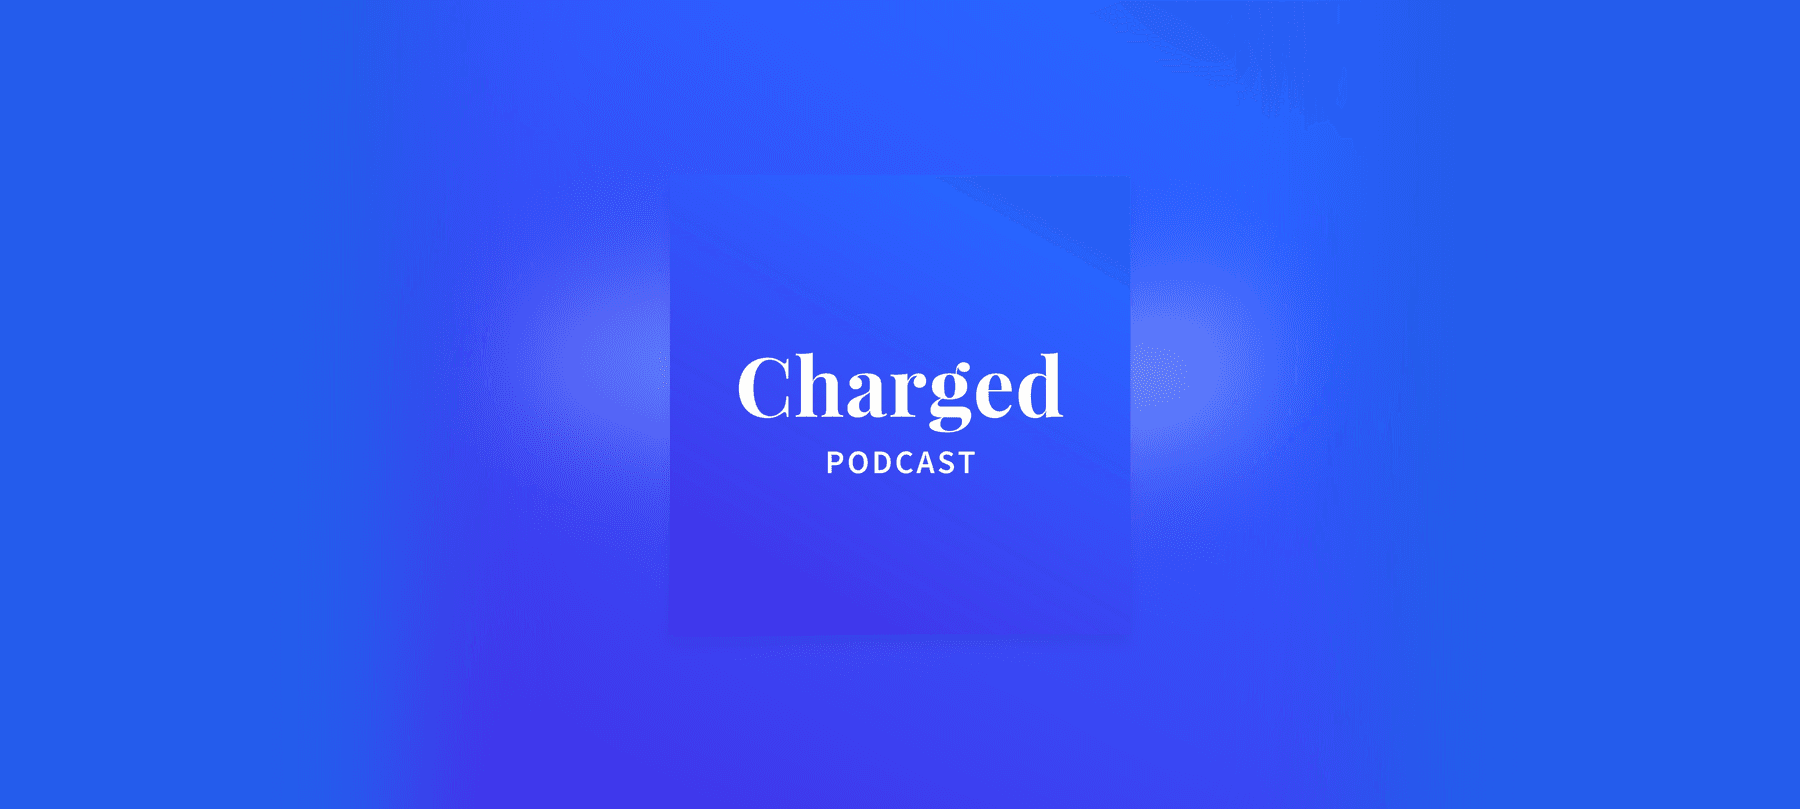 Podcasts charged